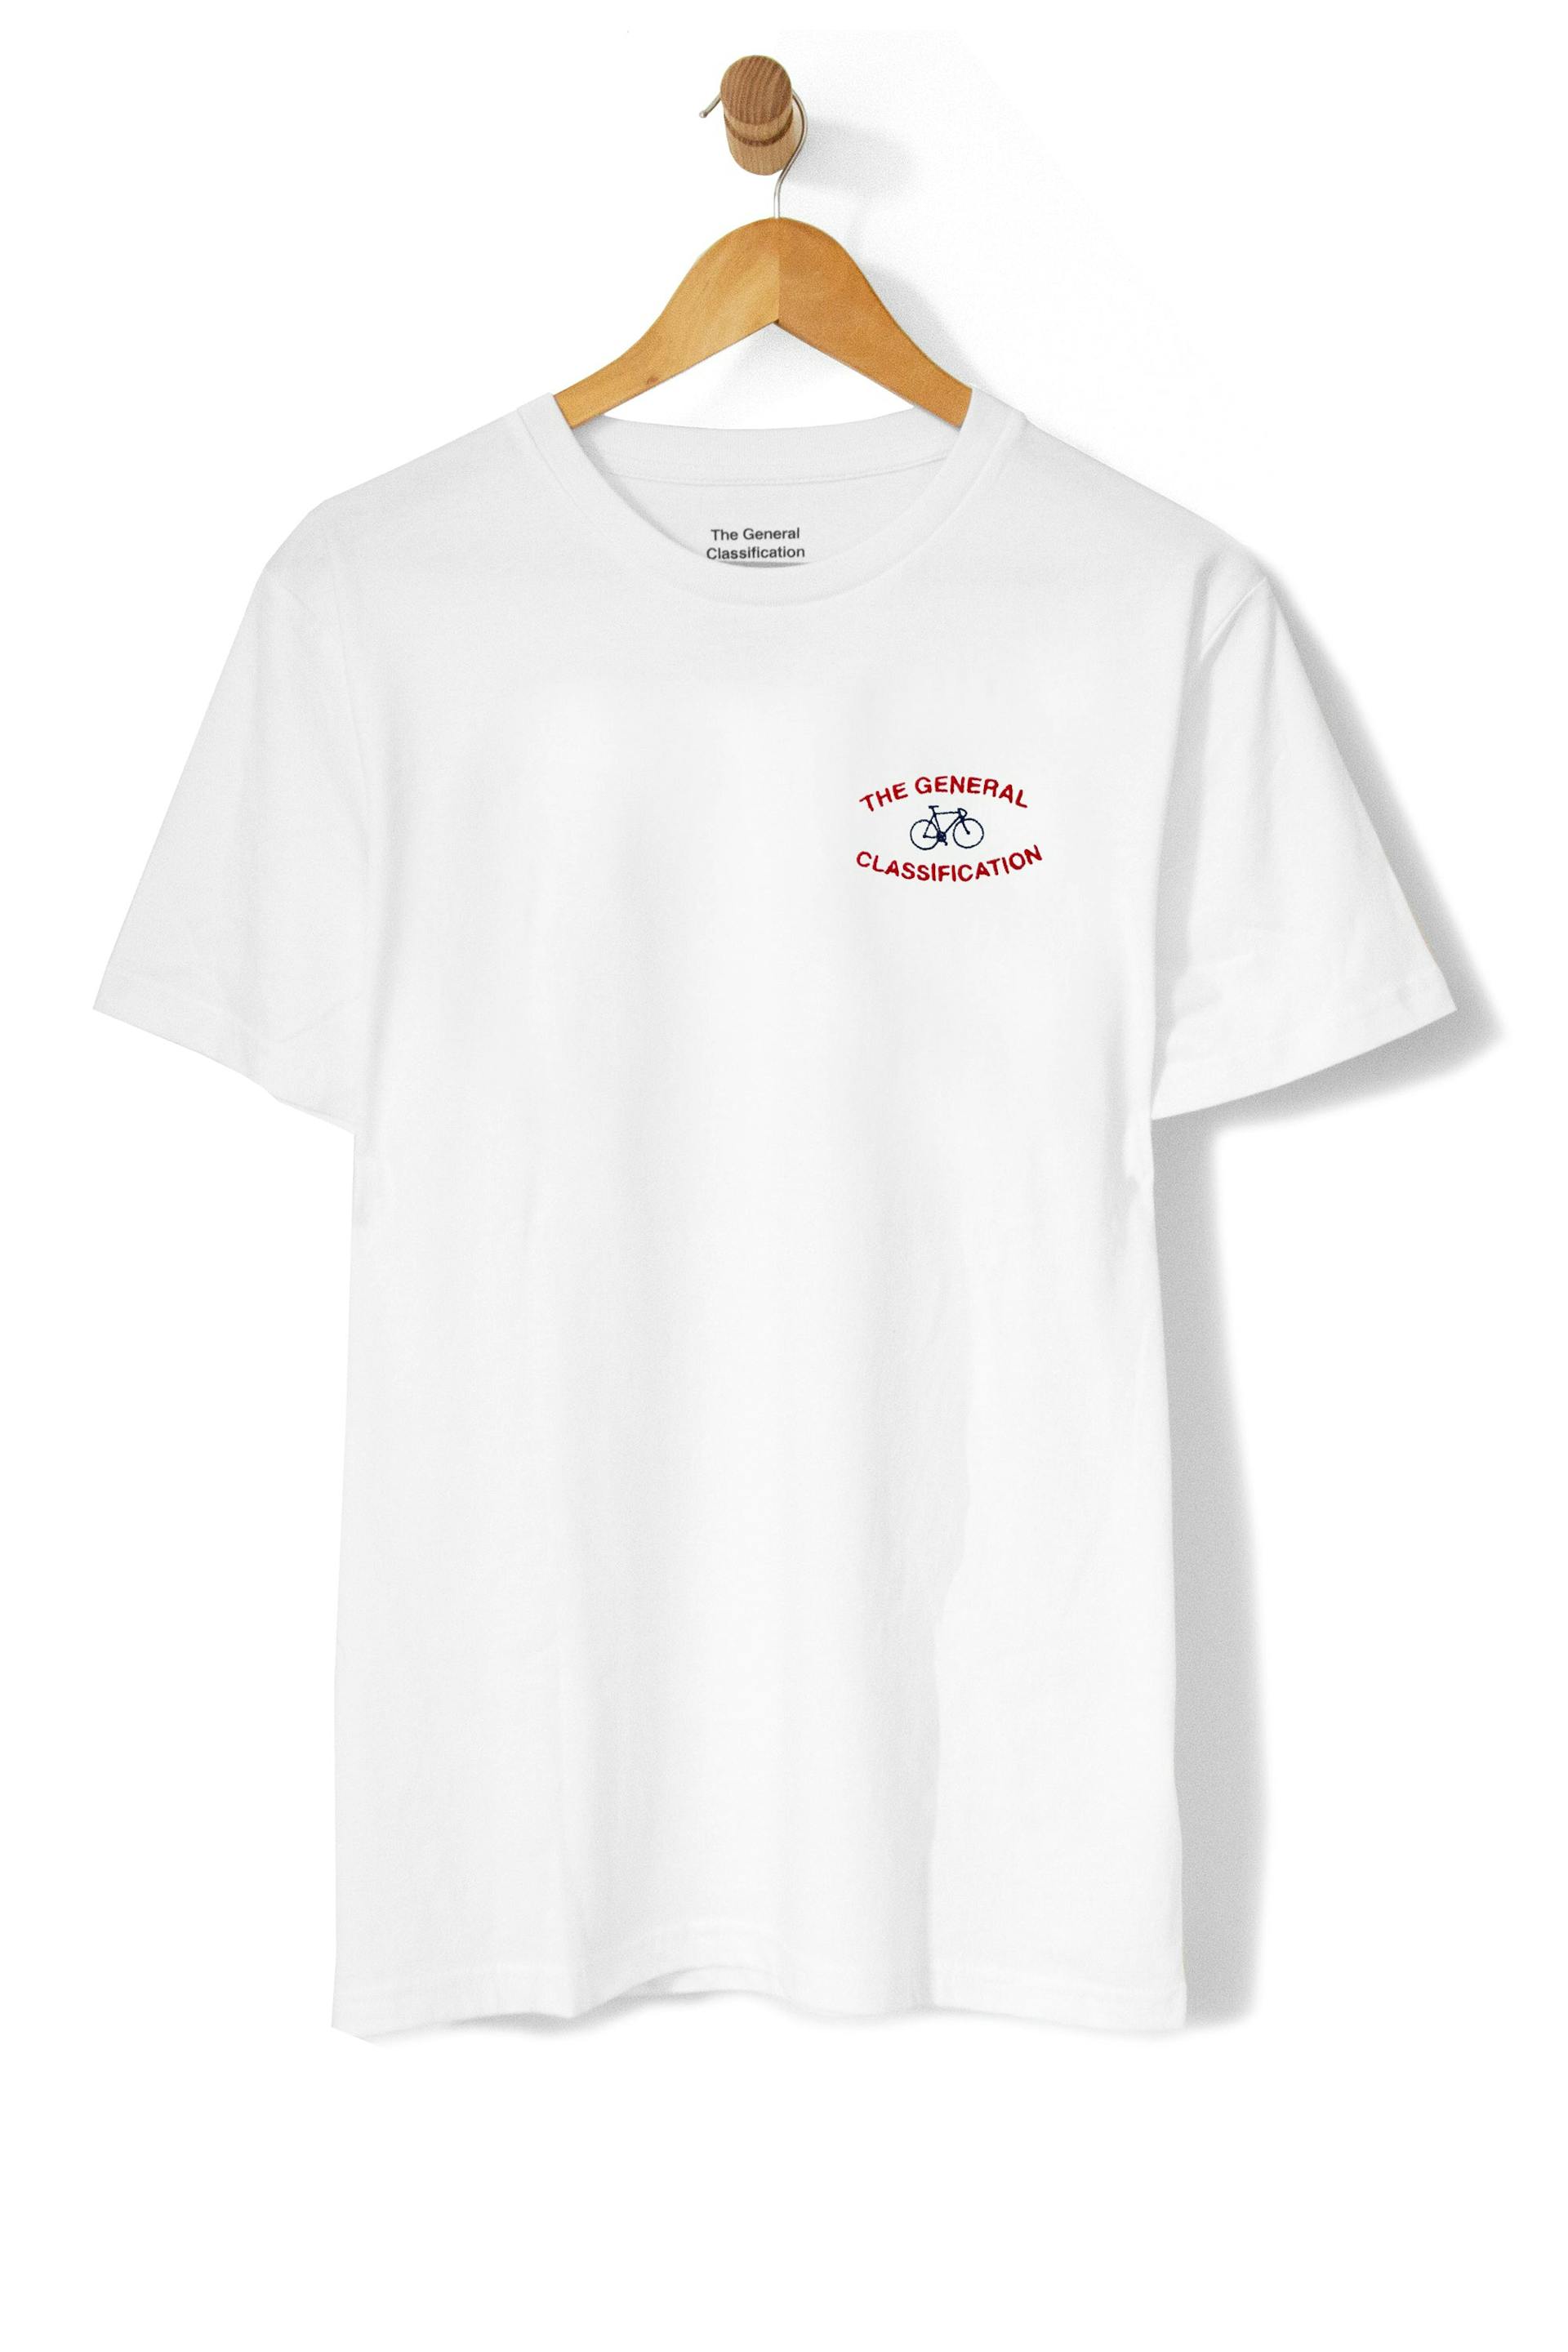 Stitched Median Bicycle Tee White